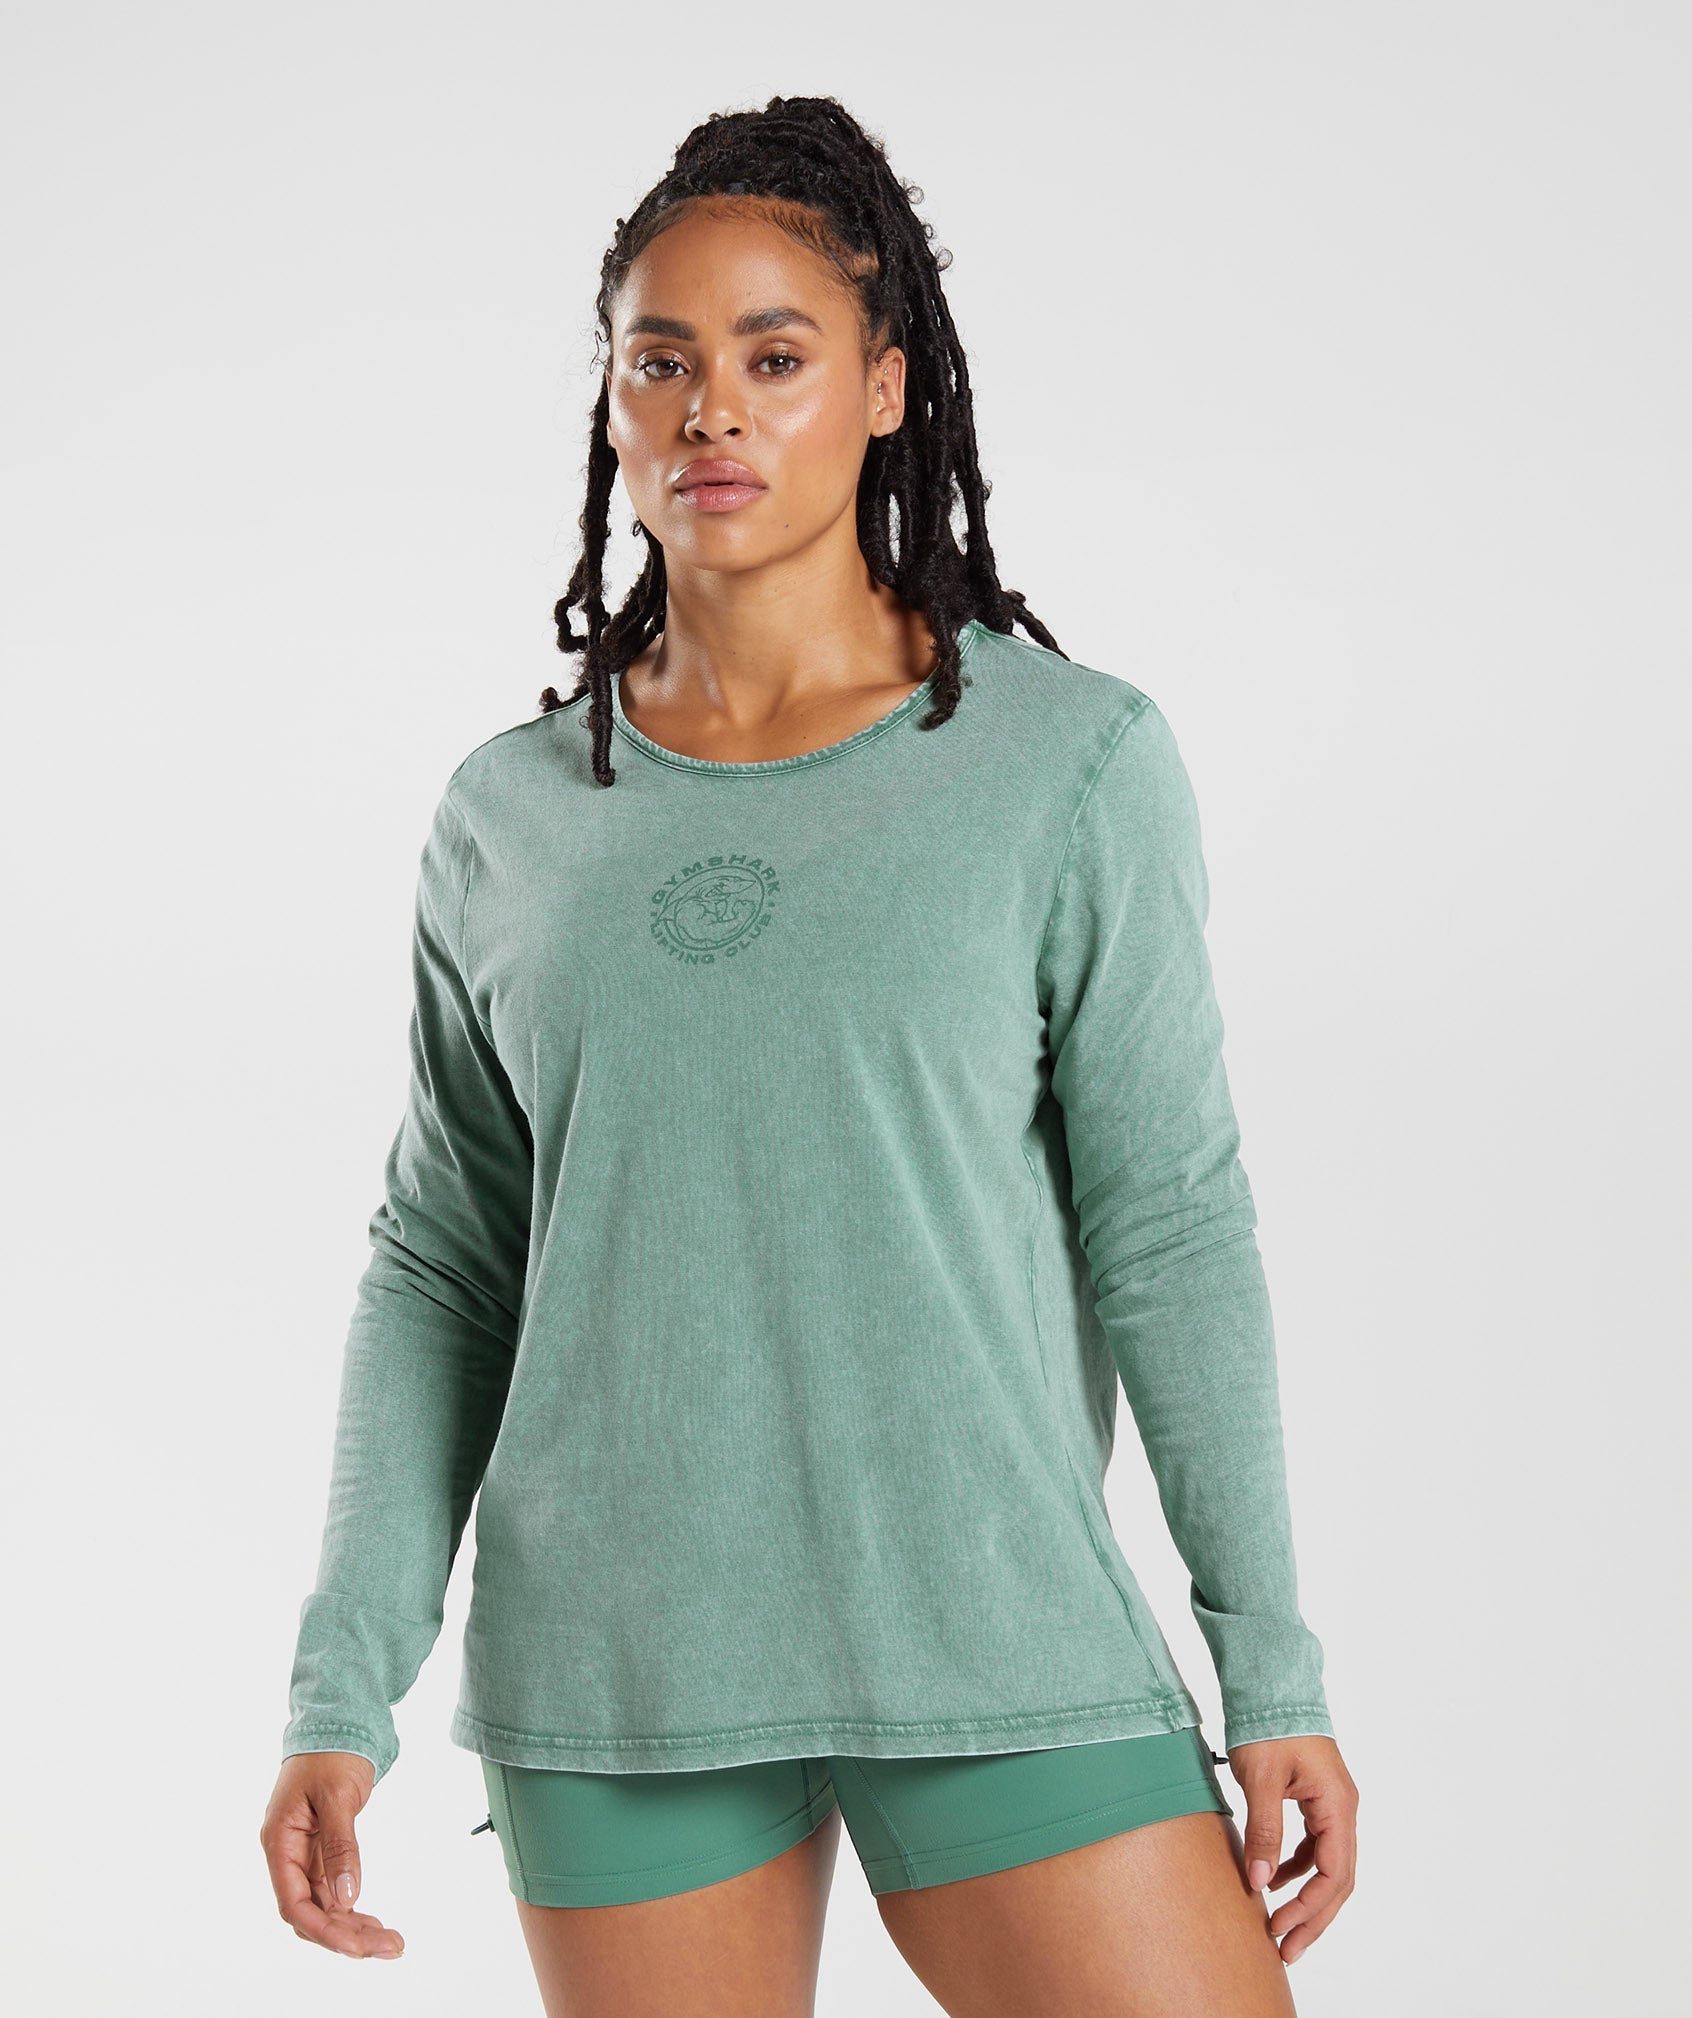 Legacy Washed Long Sleeve Top in Hoya Green - view 1